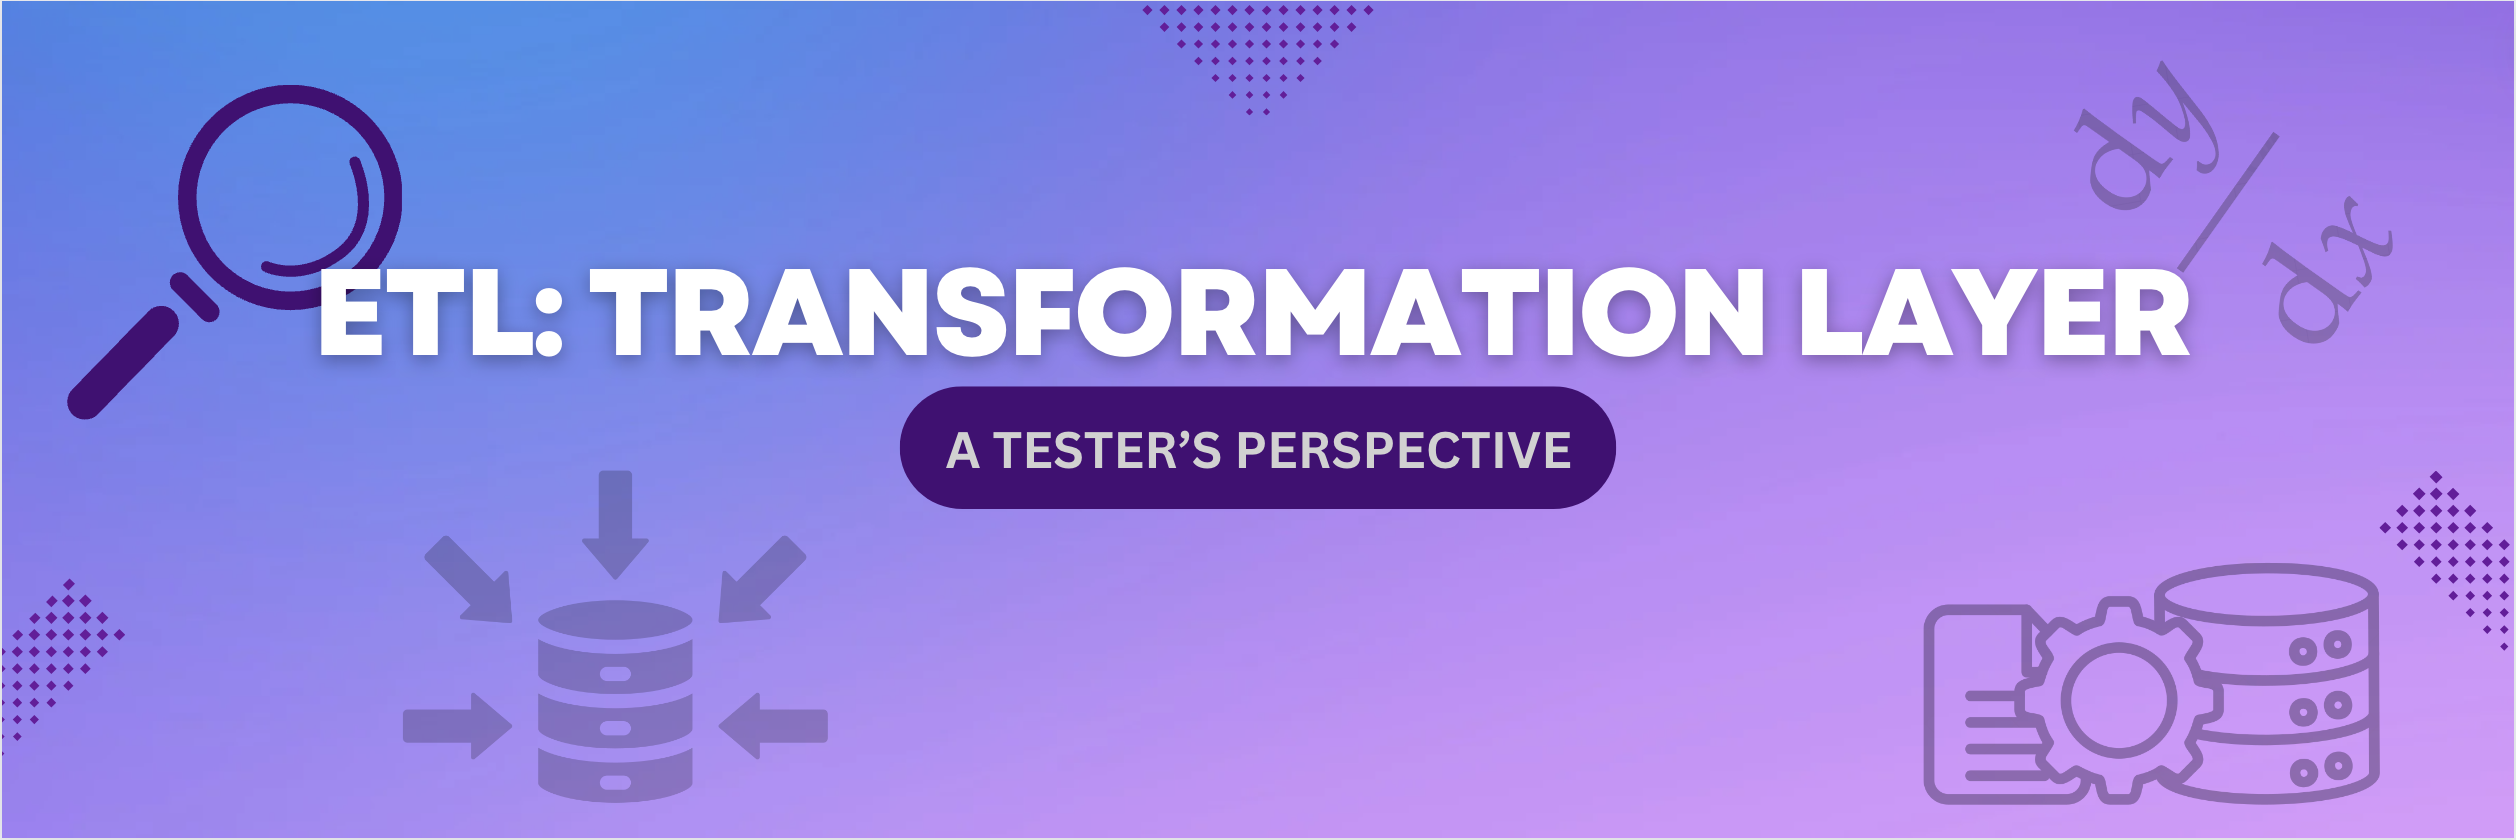 ETL: TRANSFORMATION LAYER – A TESTER’S PERSPECTIVE